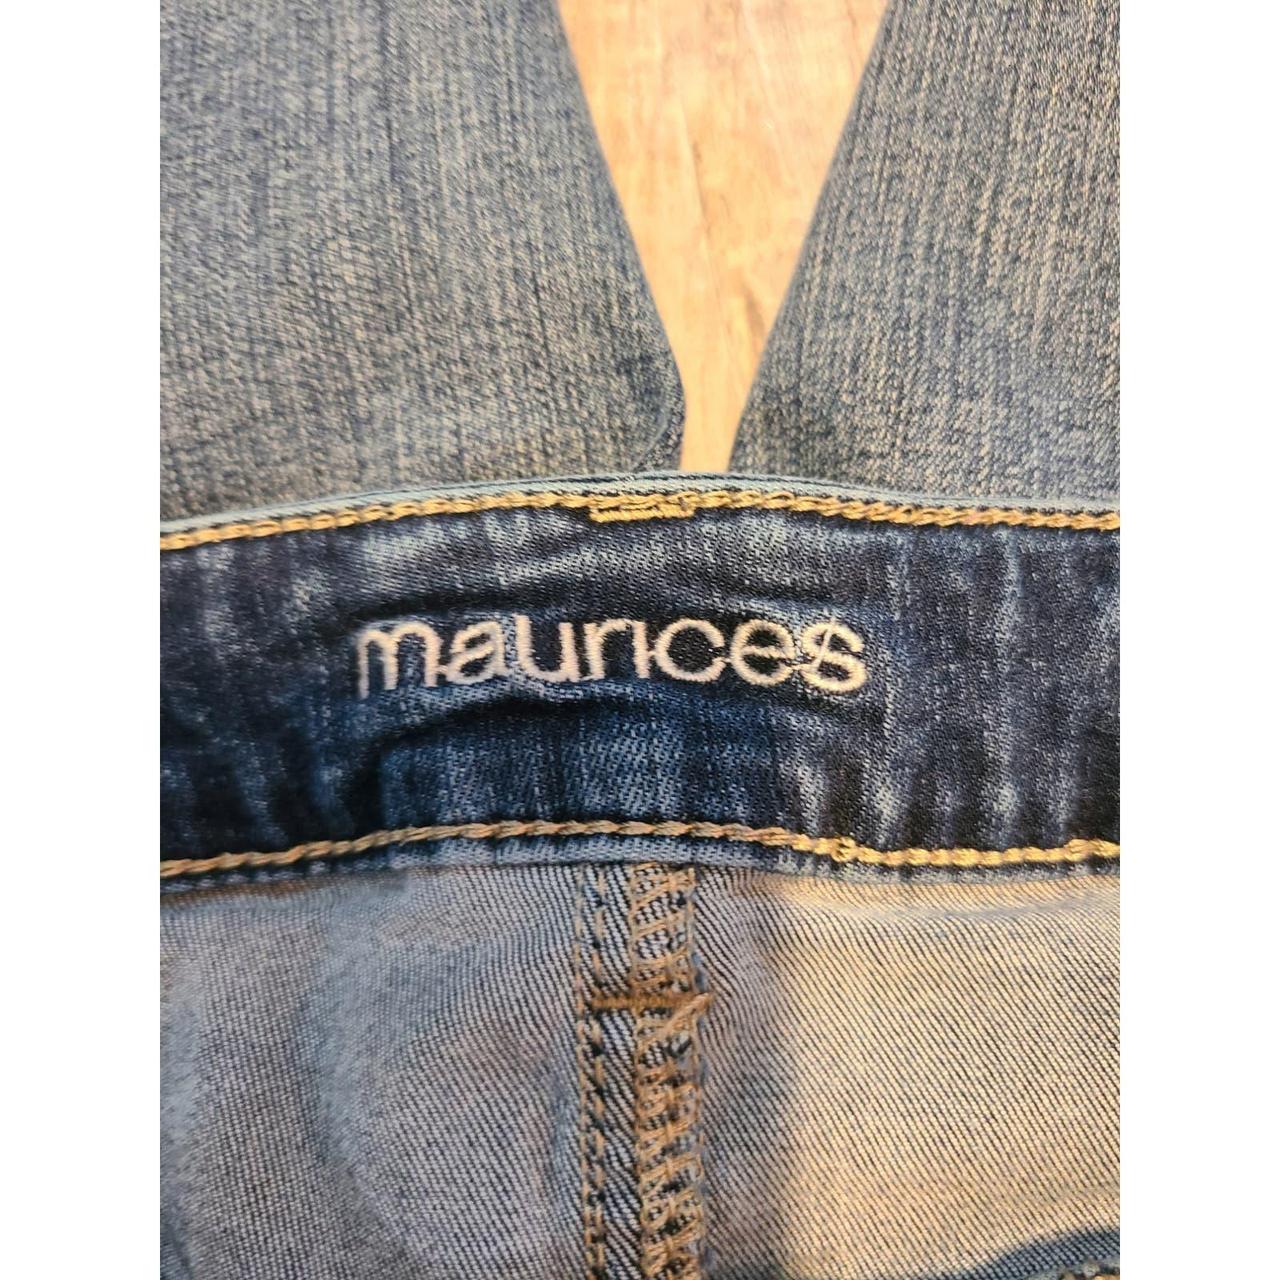 Maurices Womens Denim Jeans Size Small Jeggings Back Pockets